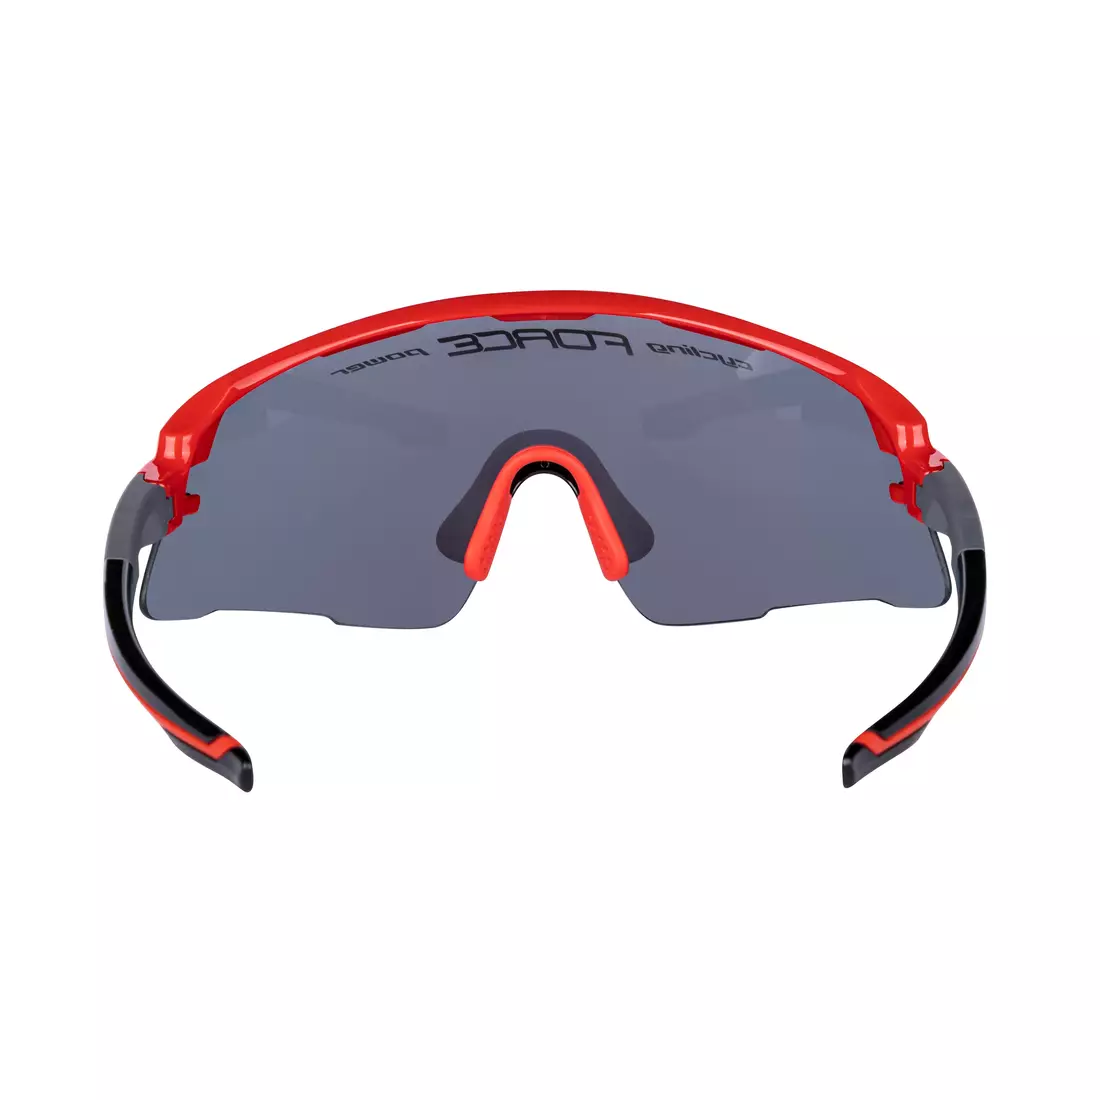 FORCE športové okuliare AMBIENT (red mirror lens S3) red/grey 910932